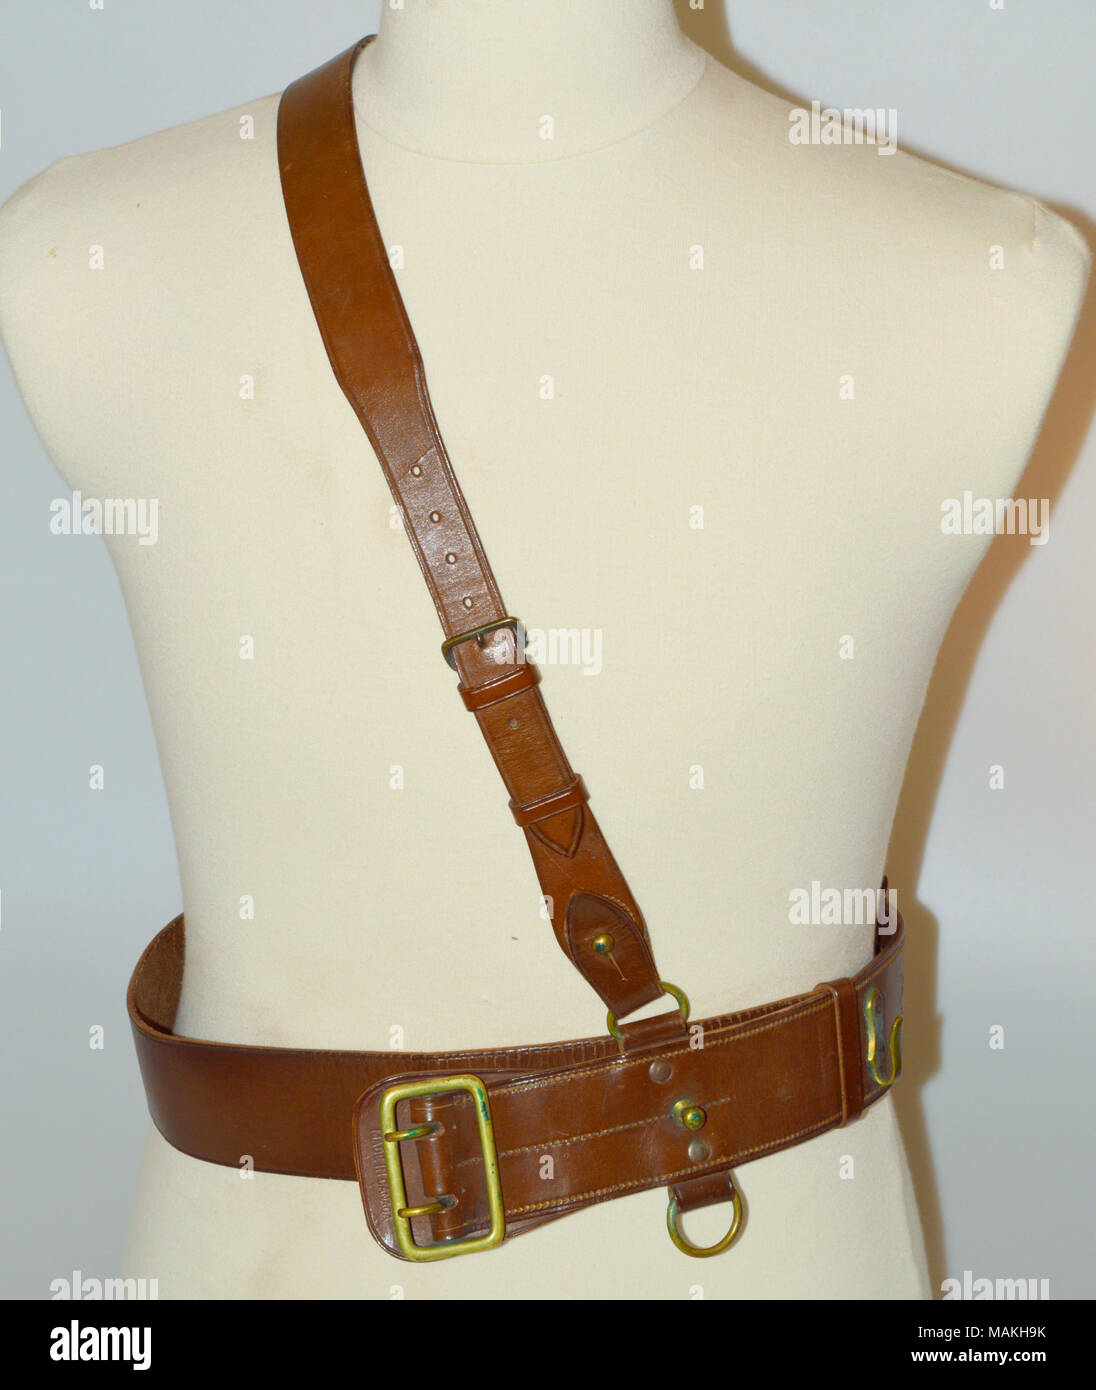 Canadian made, brown leather, Sam Browne belt. These belts were very common among British Commonwealth and Allied officers during World War I. Title: Canadian Made Sam Browne Belt  . after 1900. Stock Photo